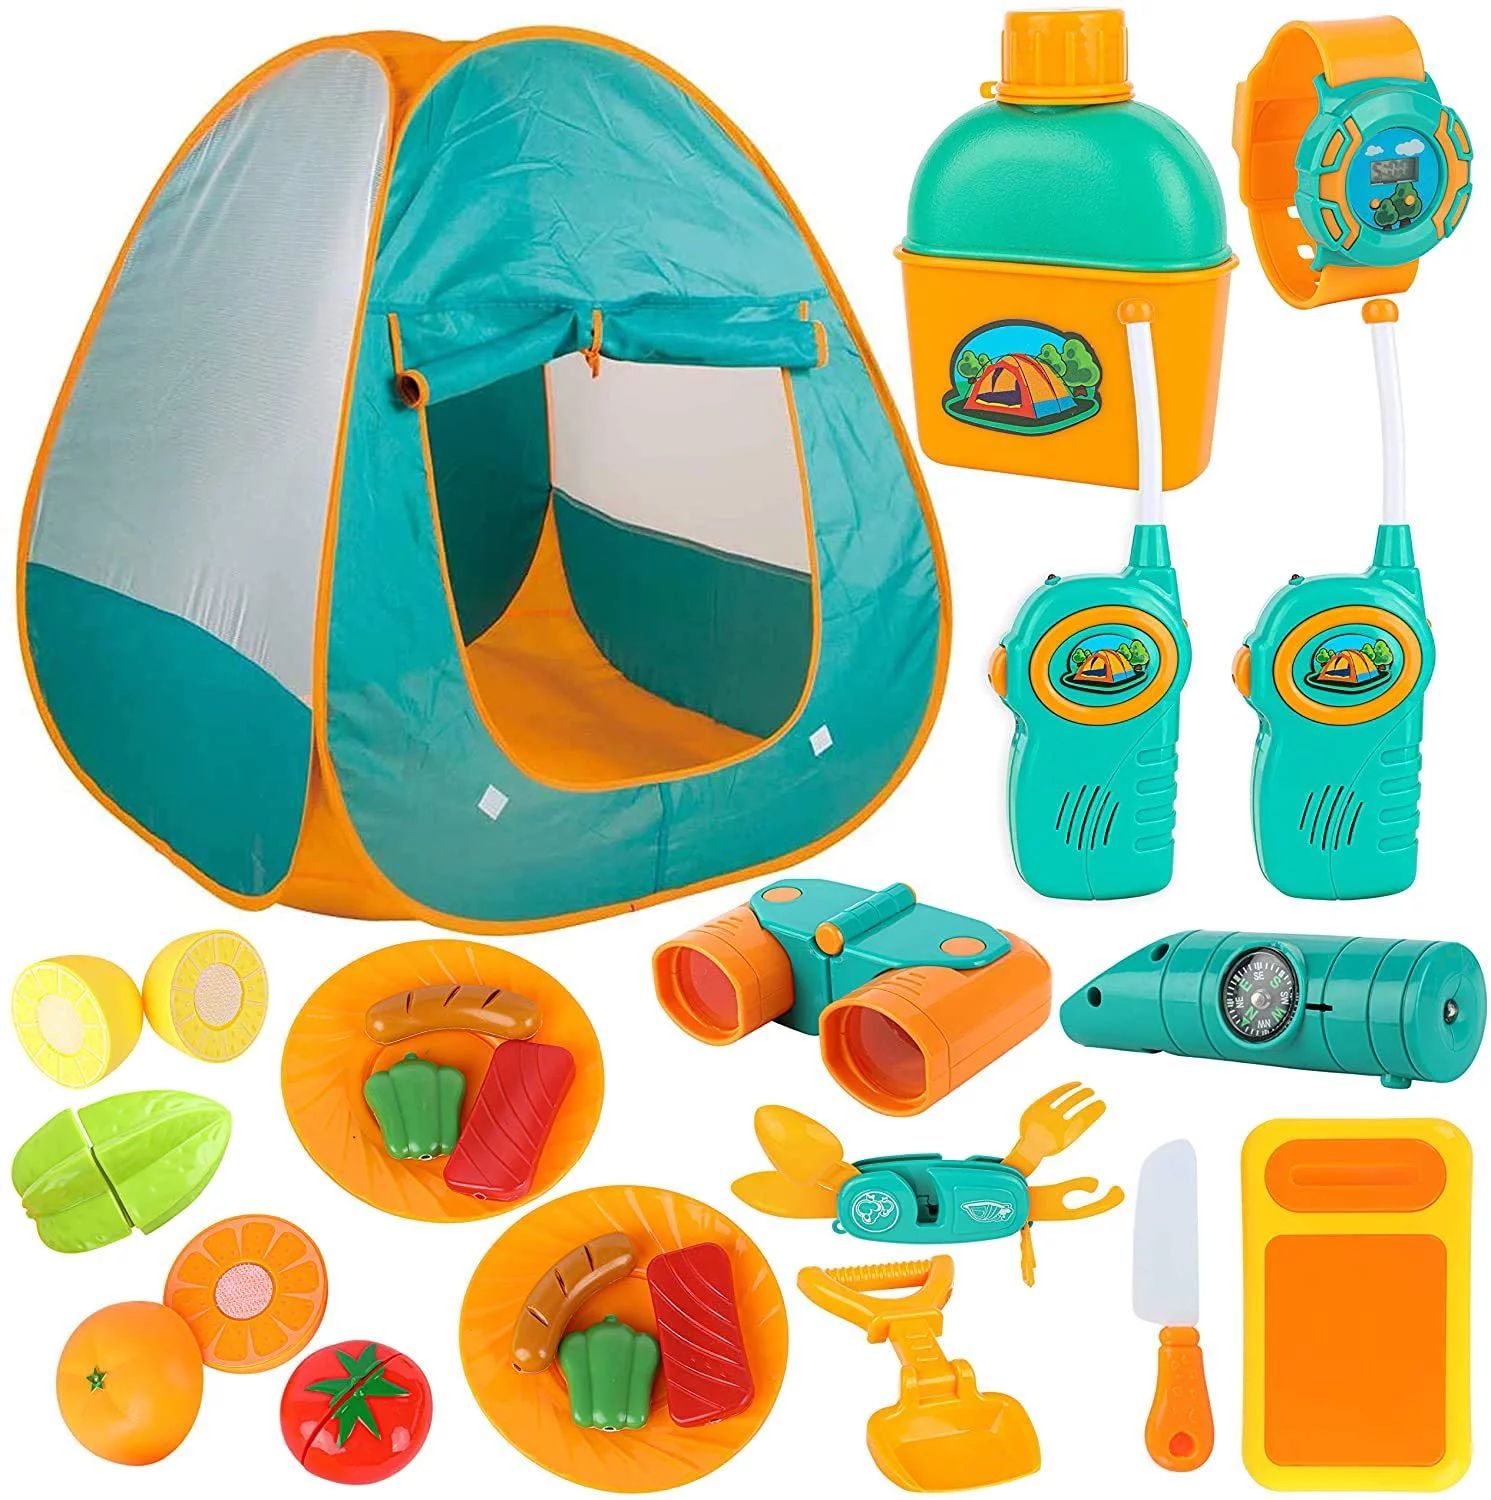 ToyVelt Kids Camping Up Tent Set -Includes Tent, Telescope, 2 Walkie Talkies, and Full Camping Ge... | Walmart (US)